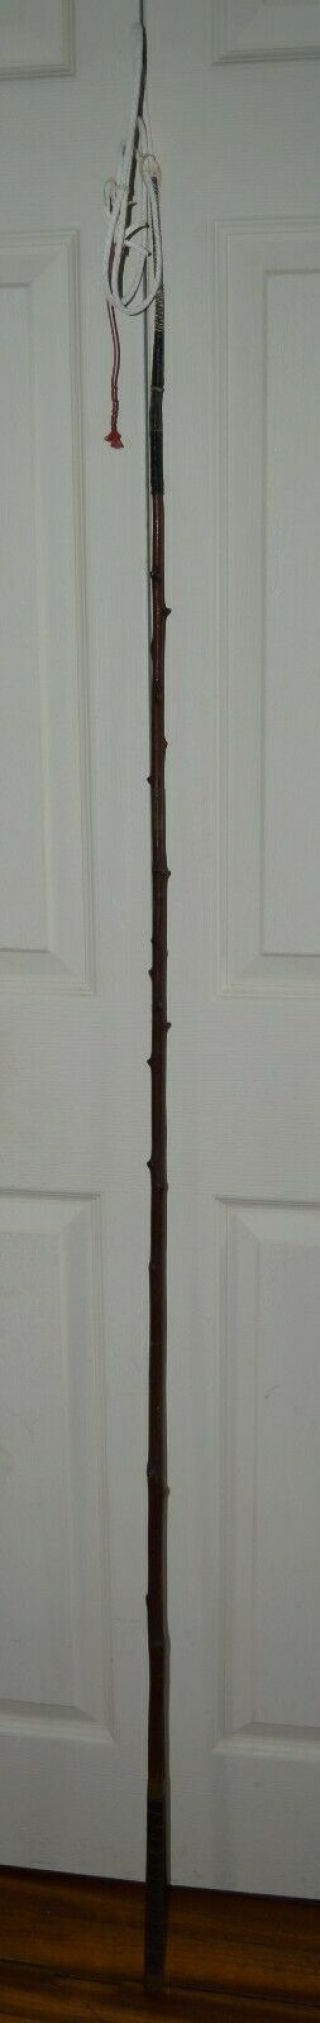 Antique Victorian Holly Coach/ Carriage Driving Whip 2